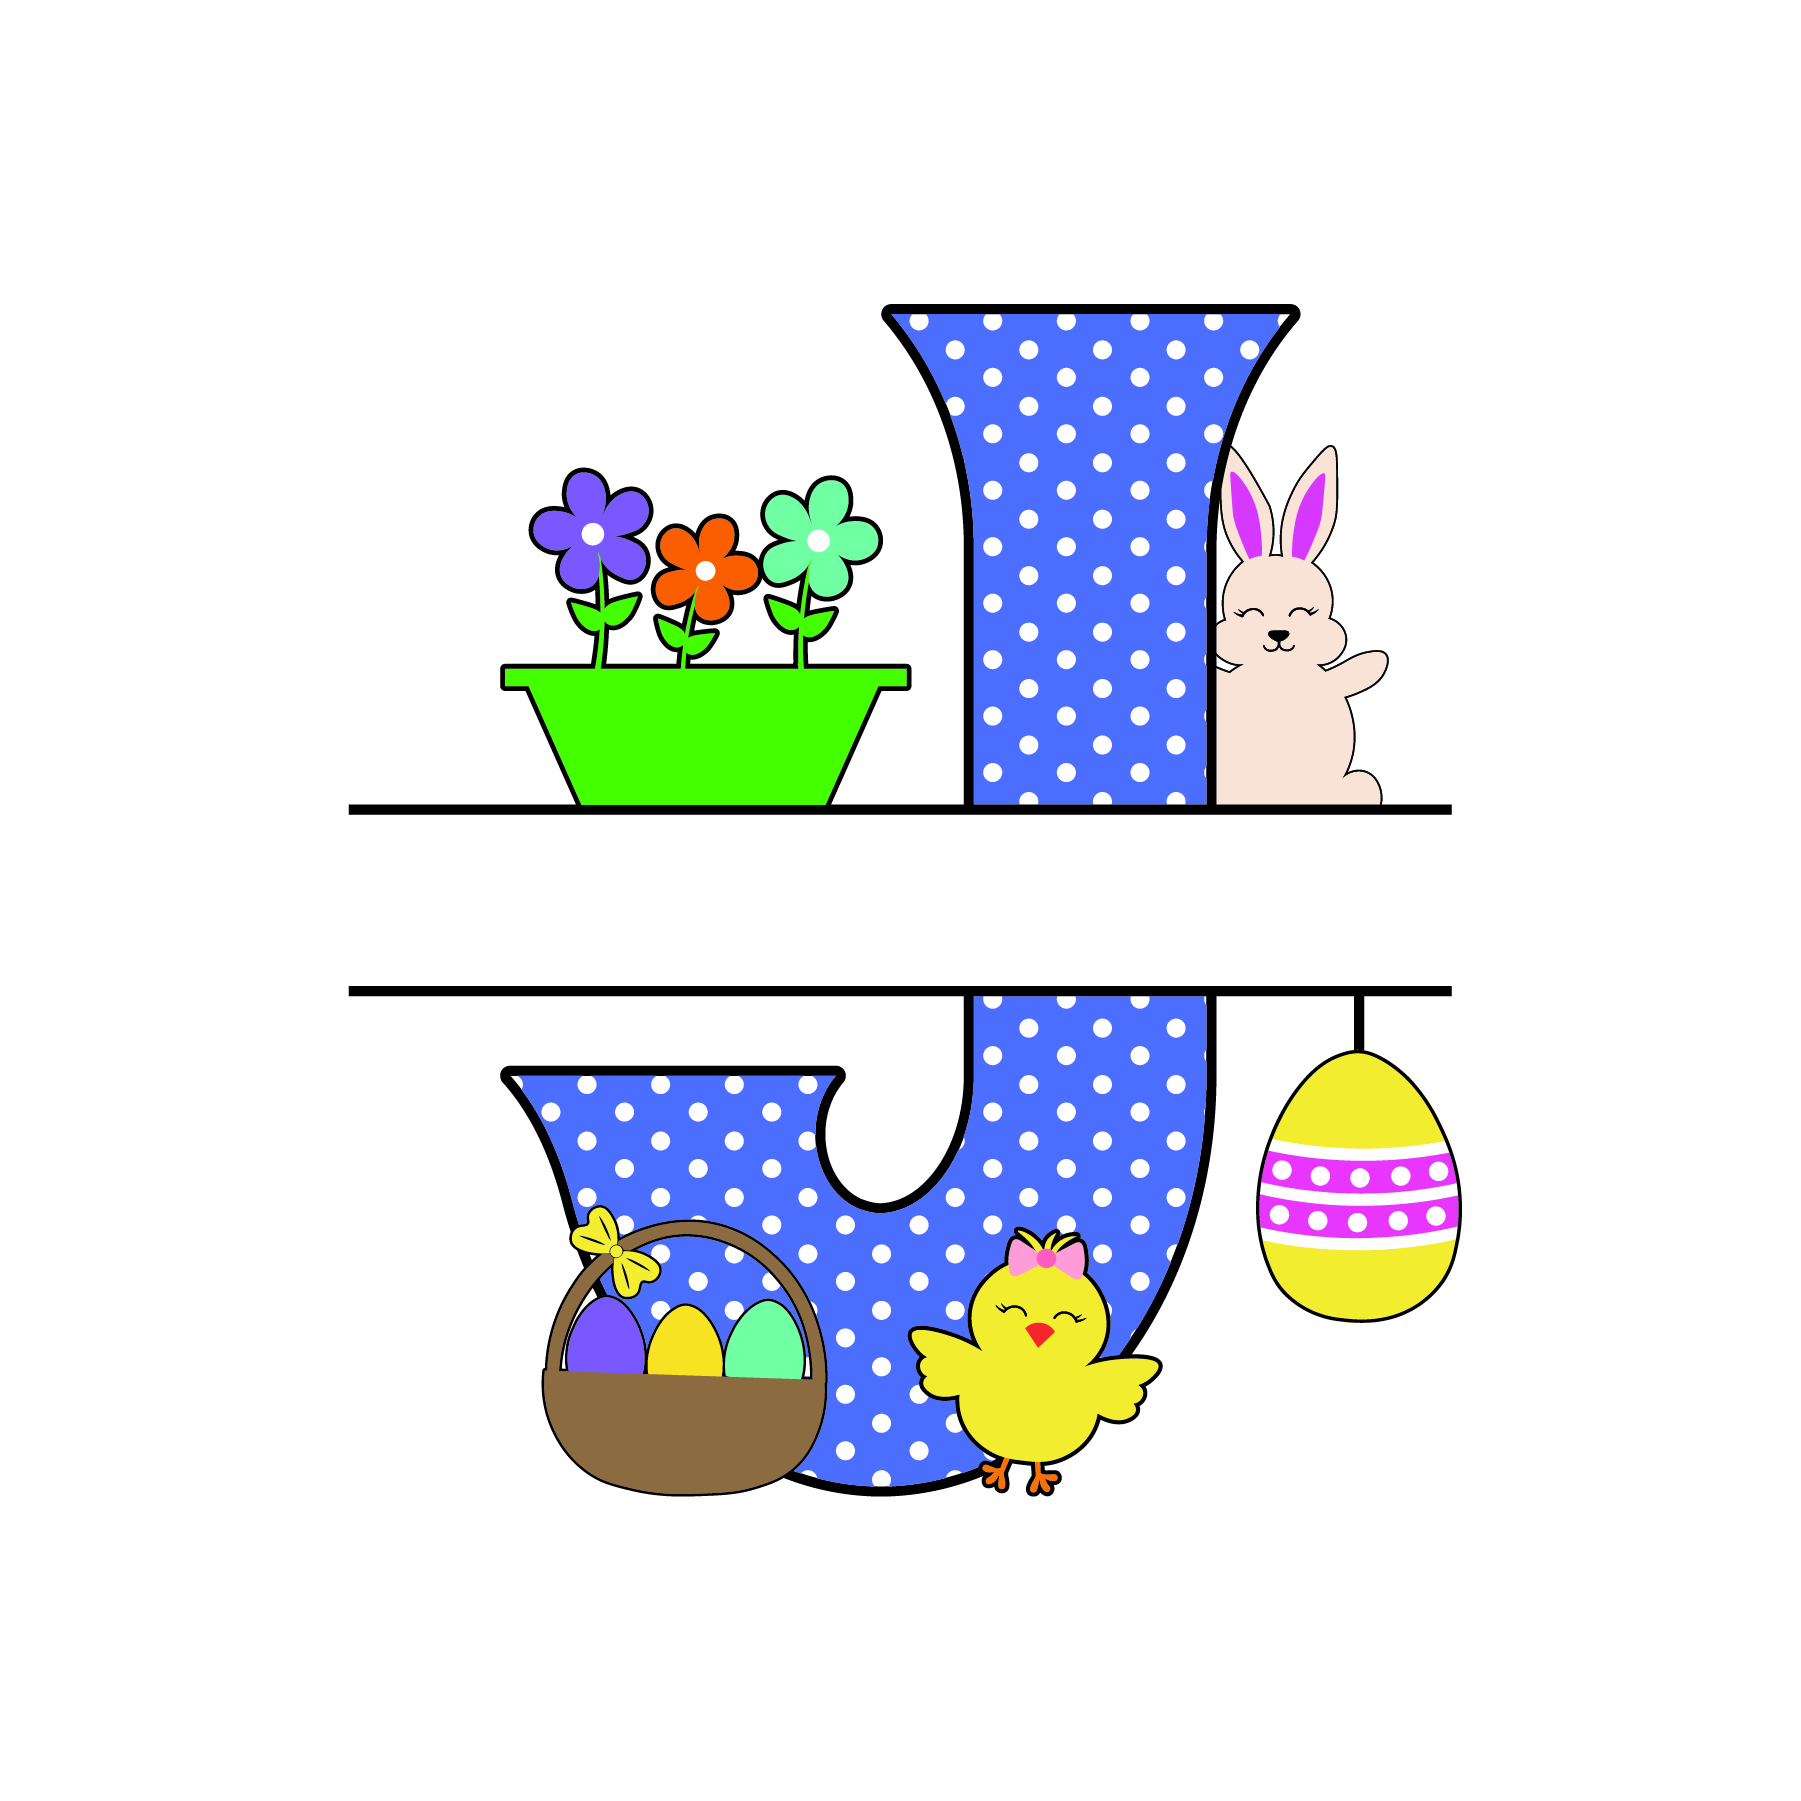 j letter free easter monogram bunny egg basket chicken clipart alphabet letter split customize or personalize stencil template to print or download vector svg laser vinyl circuit silhouette.